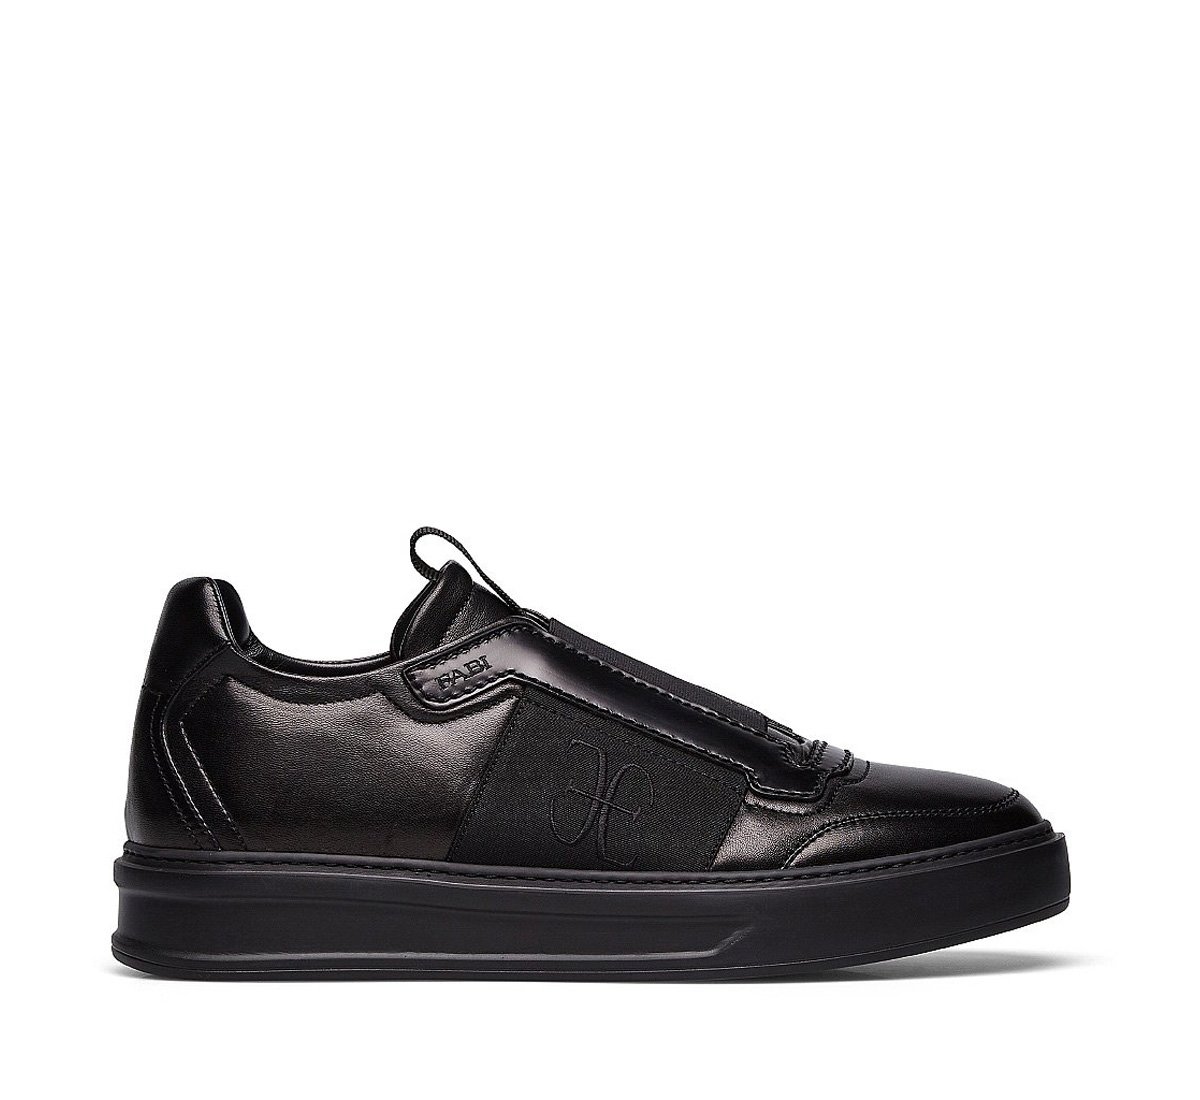 Nappa leather slip-ons